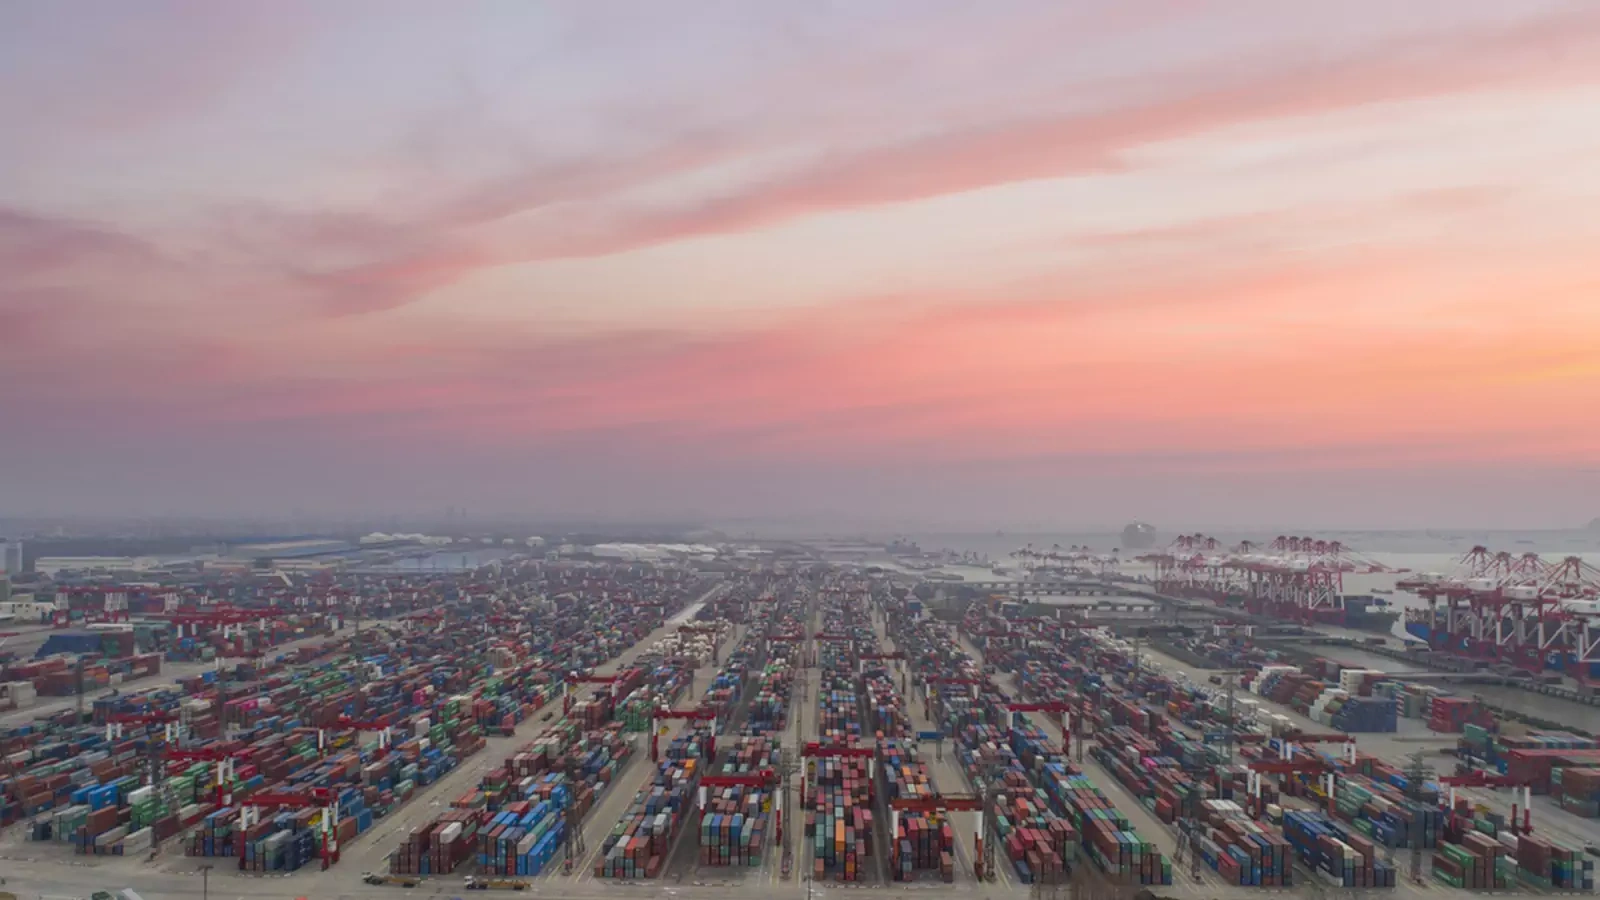 The sun sets over the Port of Shanghai.